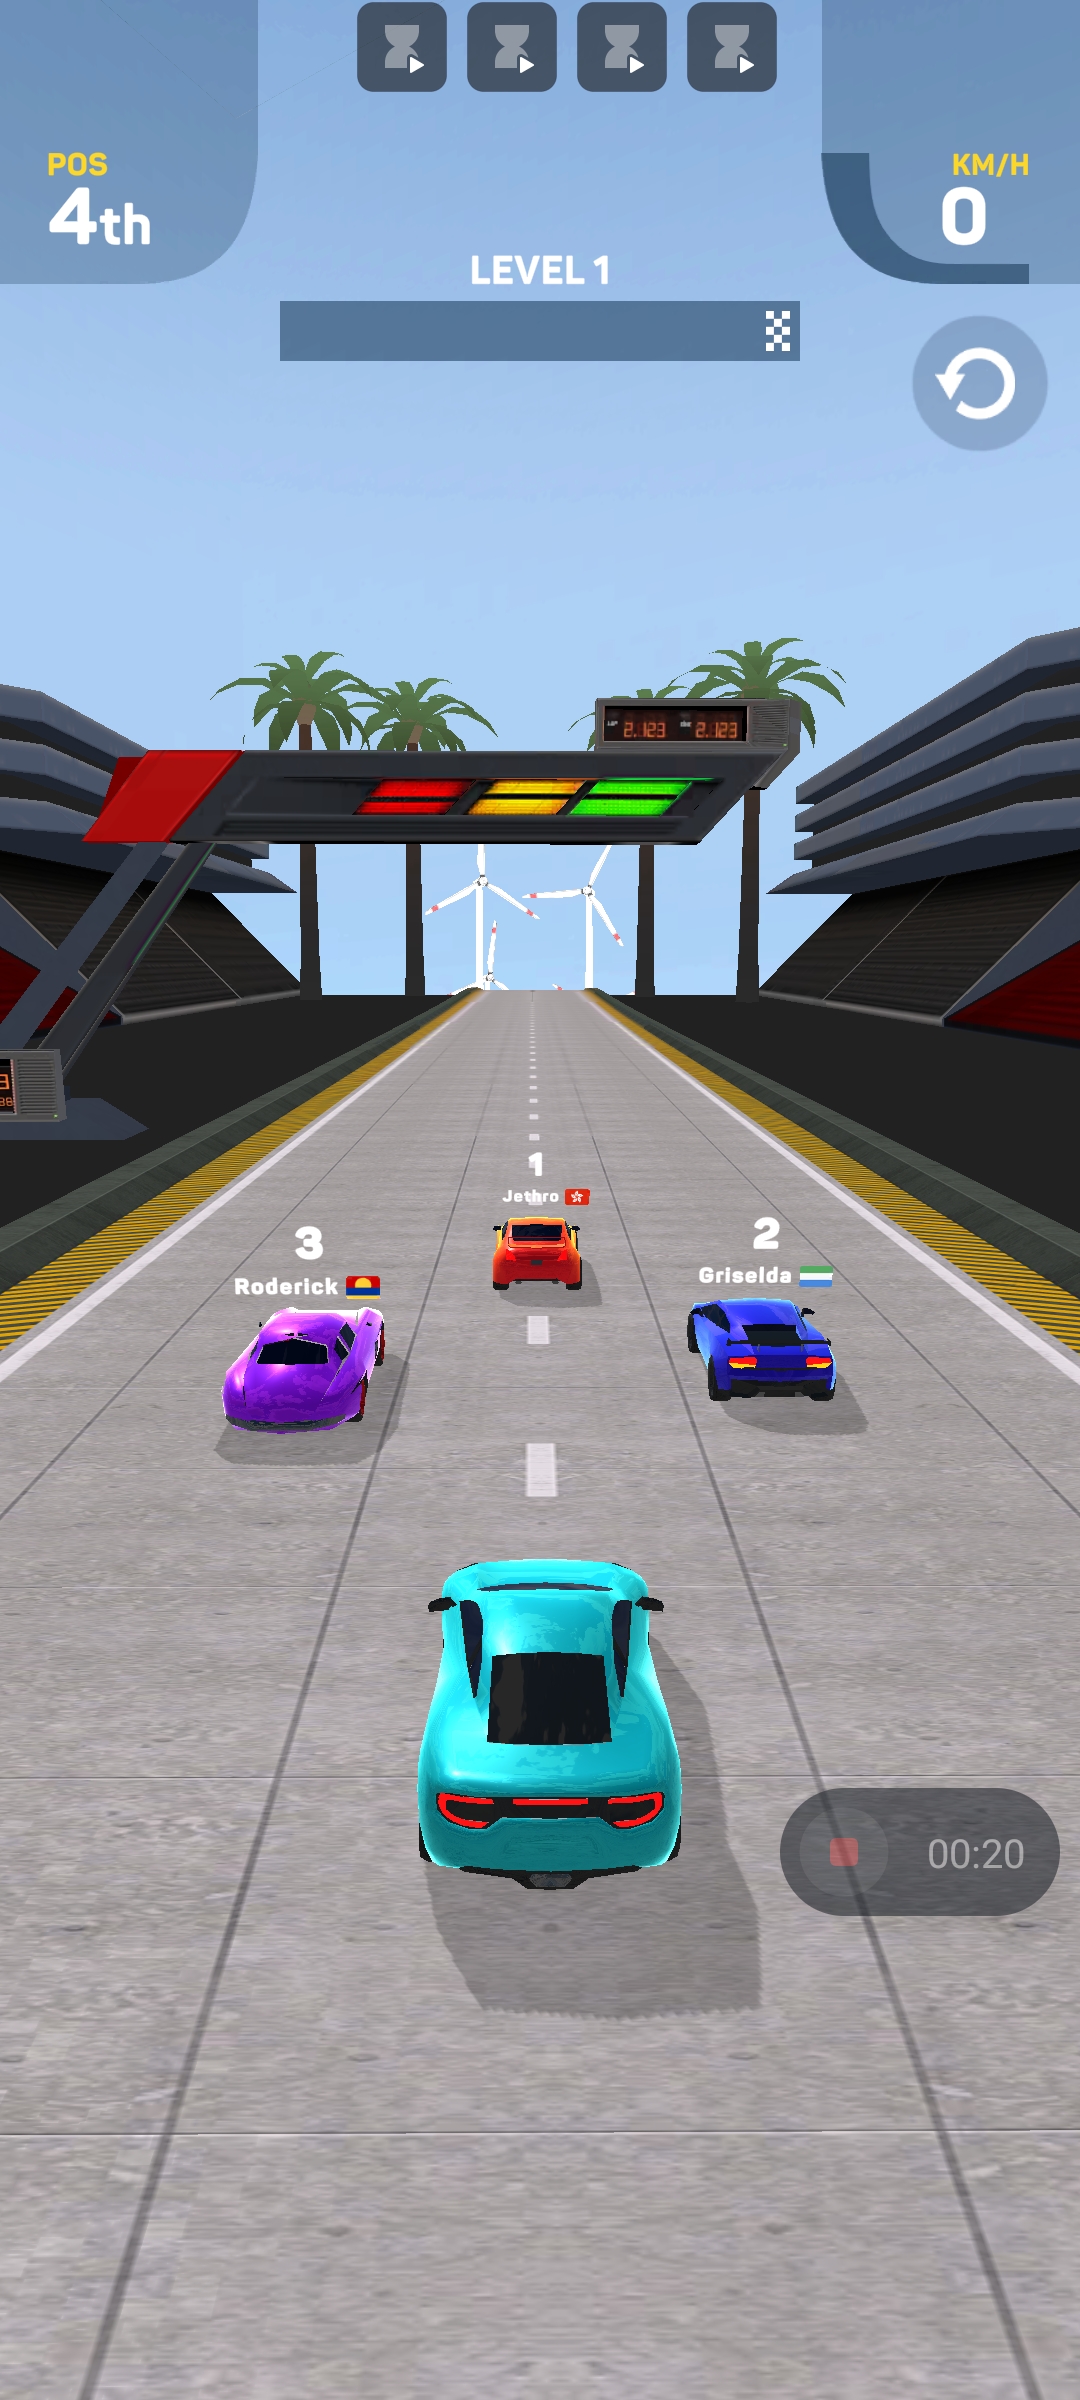 today-i-play-car-race-master-game-i-am-finished-the-1st-level-blurt